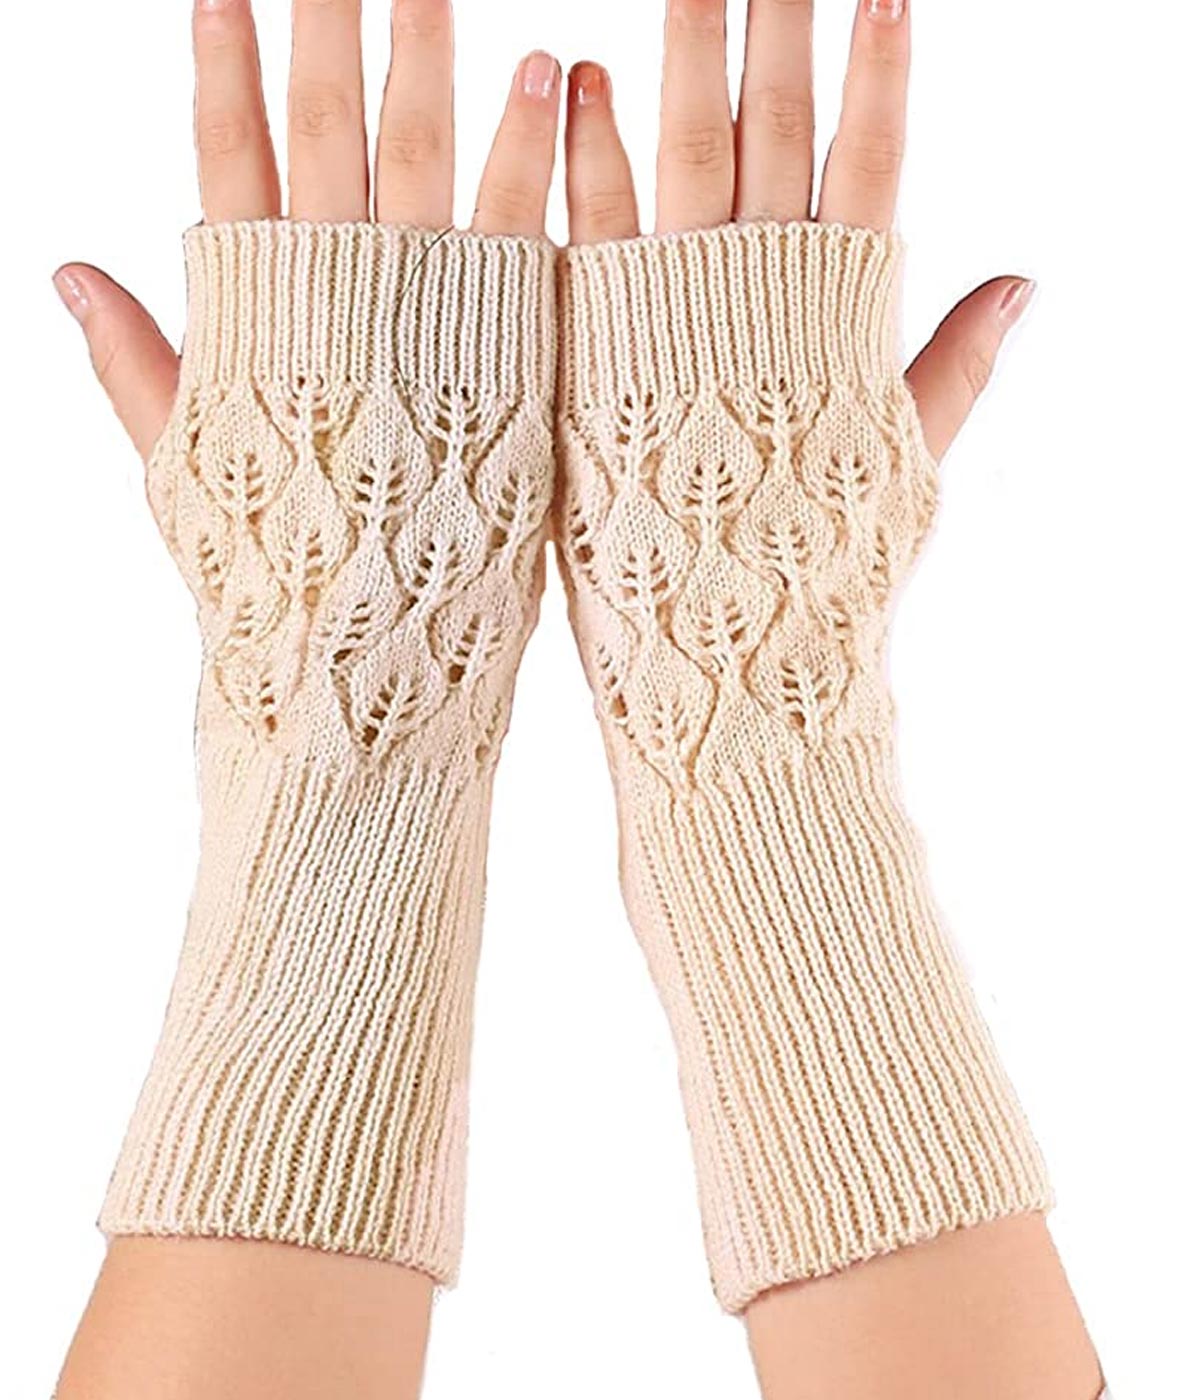 7 Gloves And Mittens Under ₹600 From Amazon | Gloves And Mittens Under ...